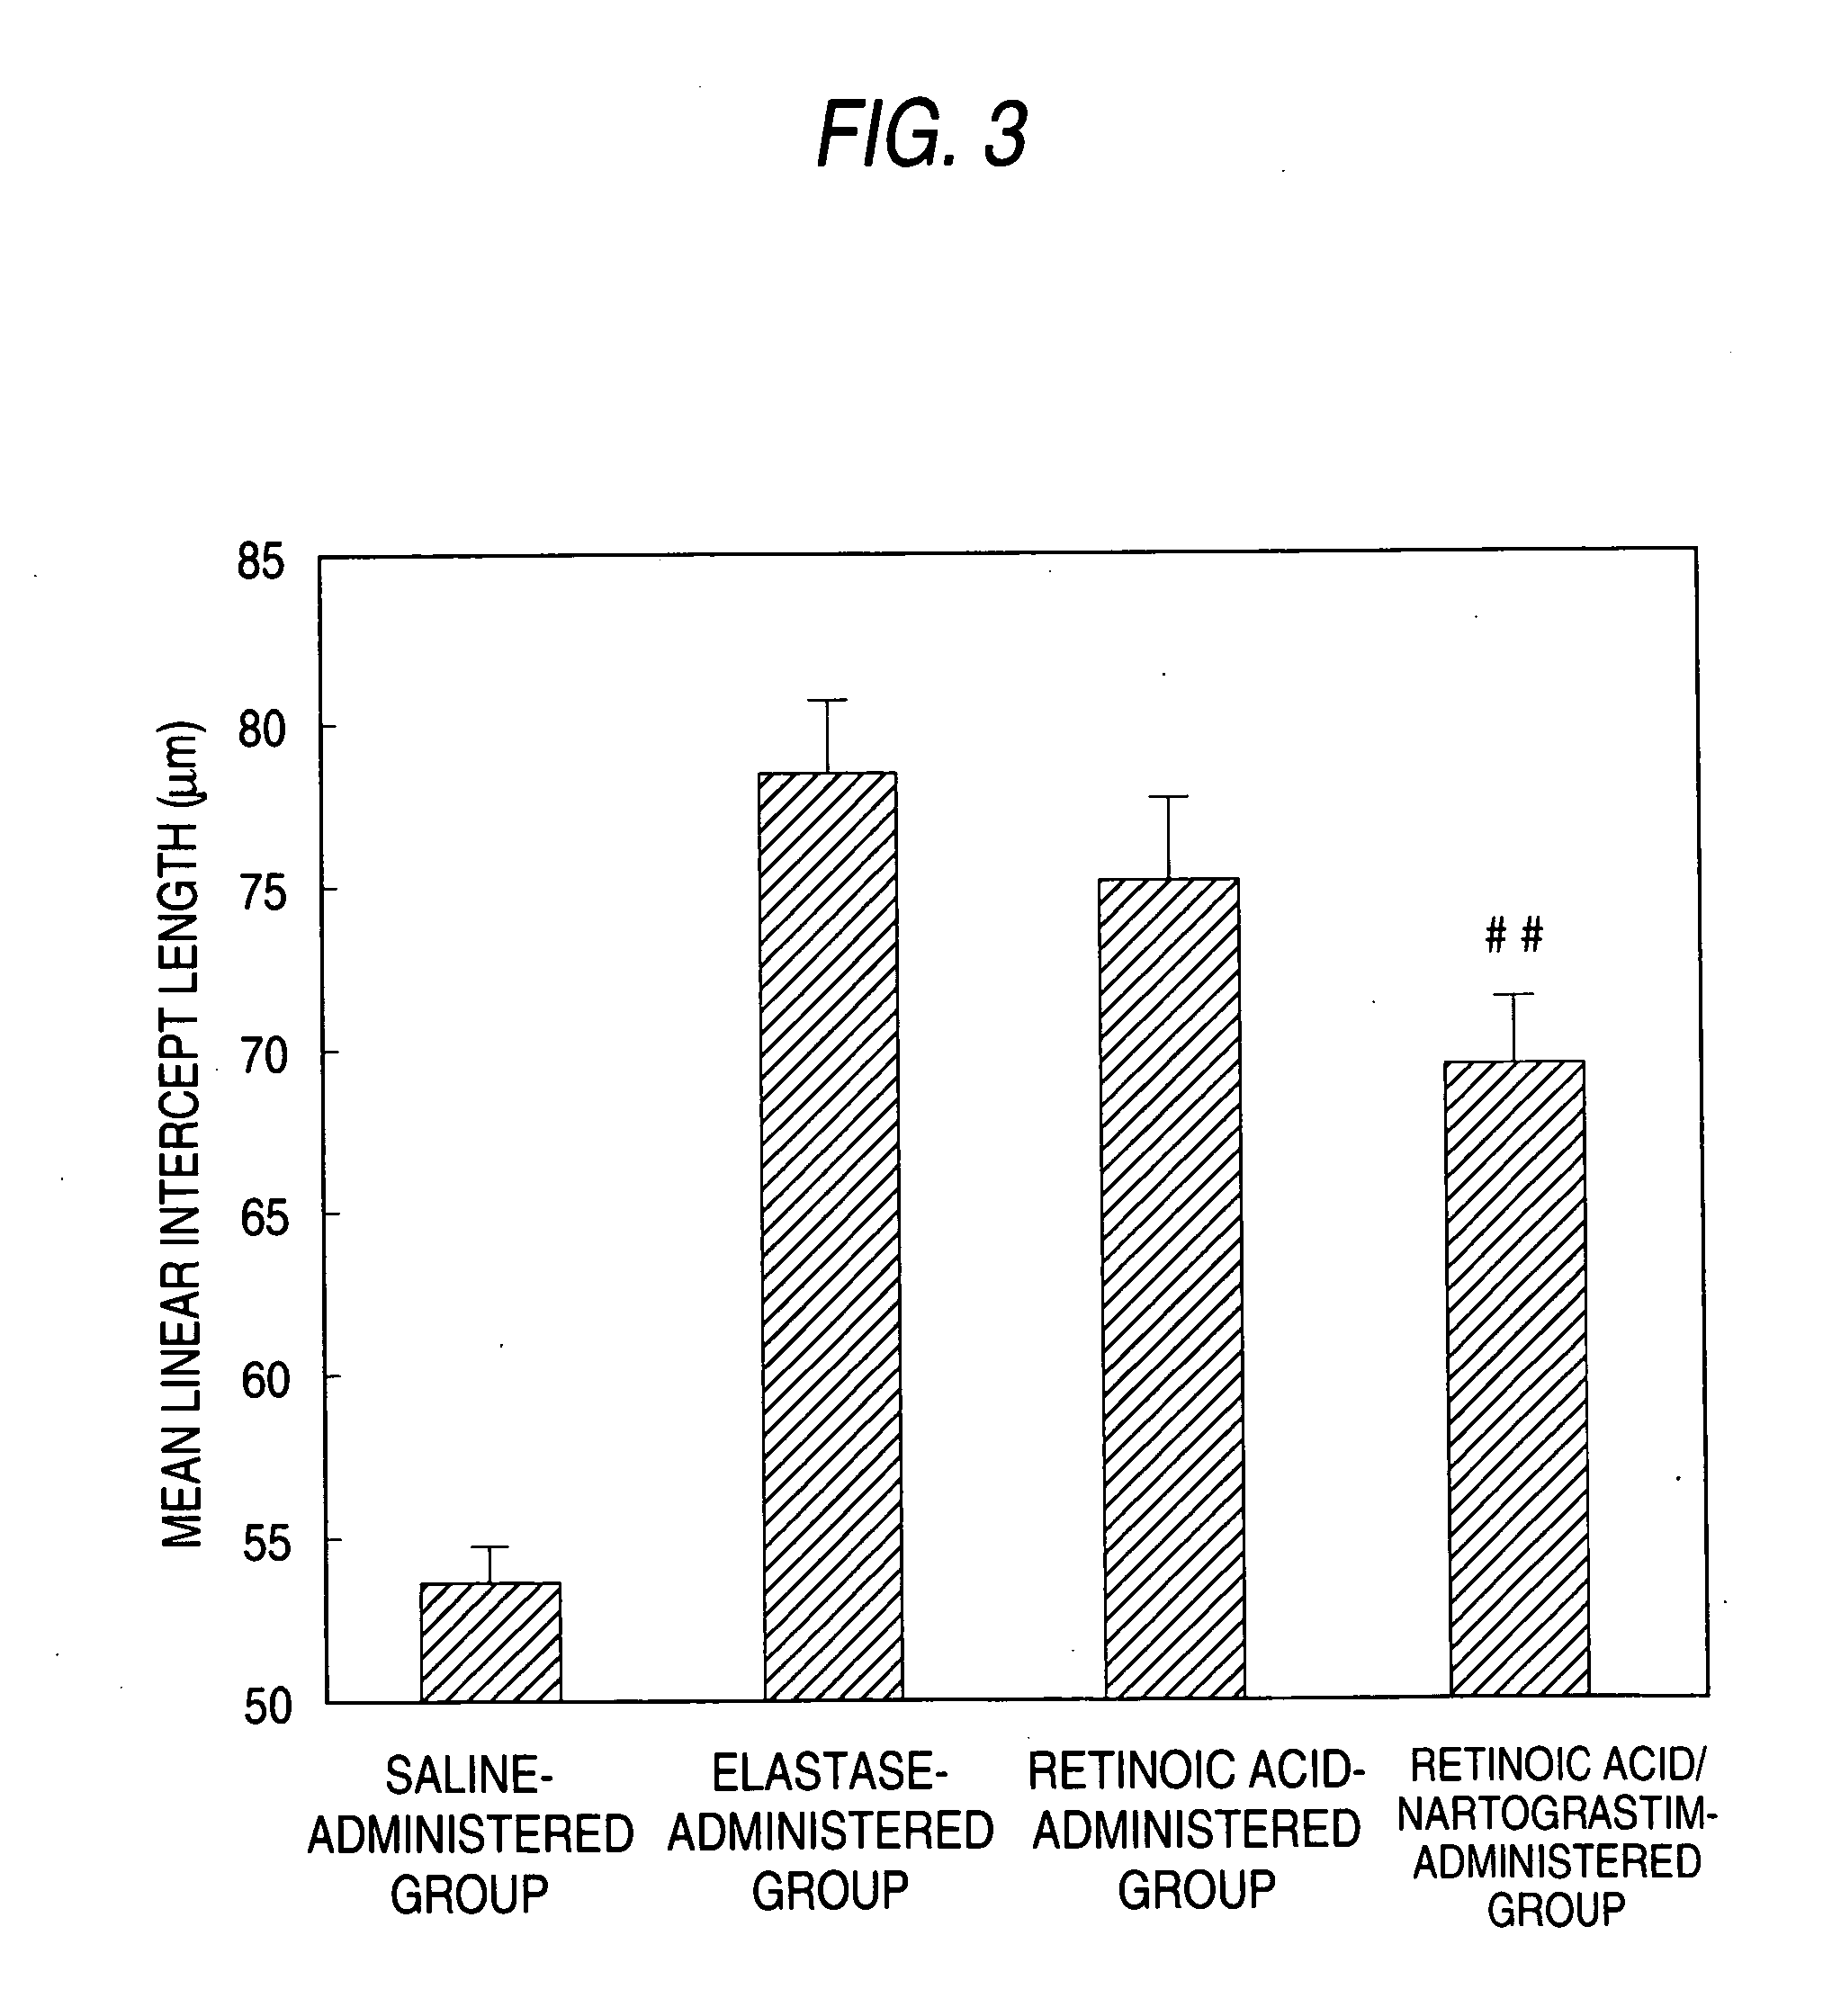 Agent for preventing and/or treating tissue disruption-accompanied diseases